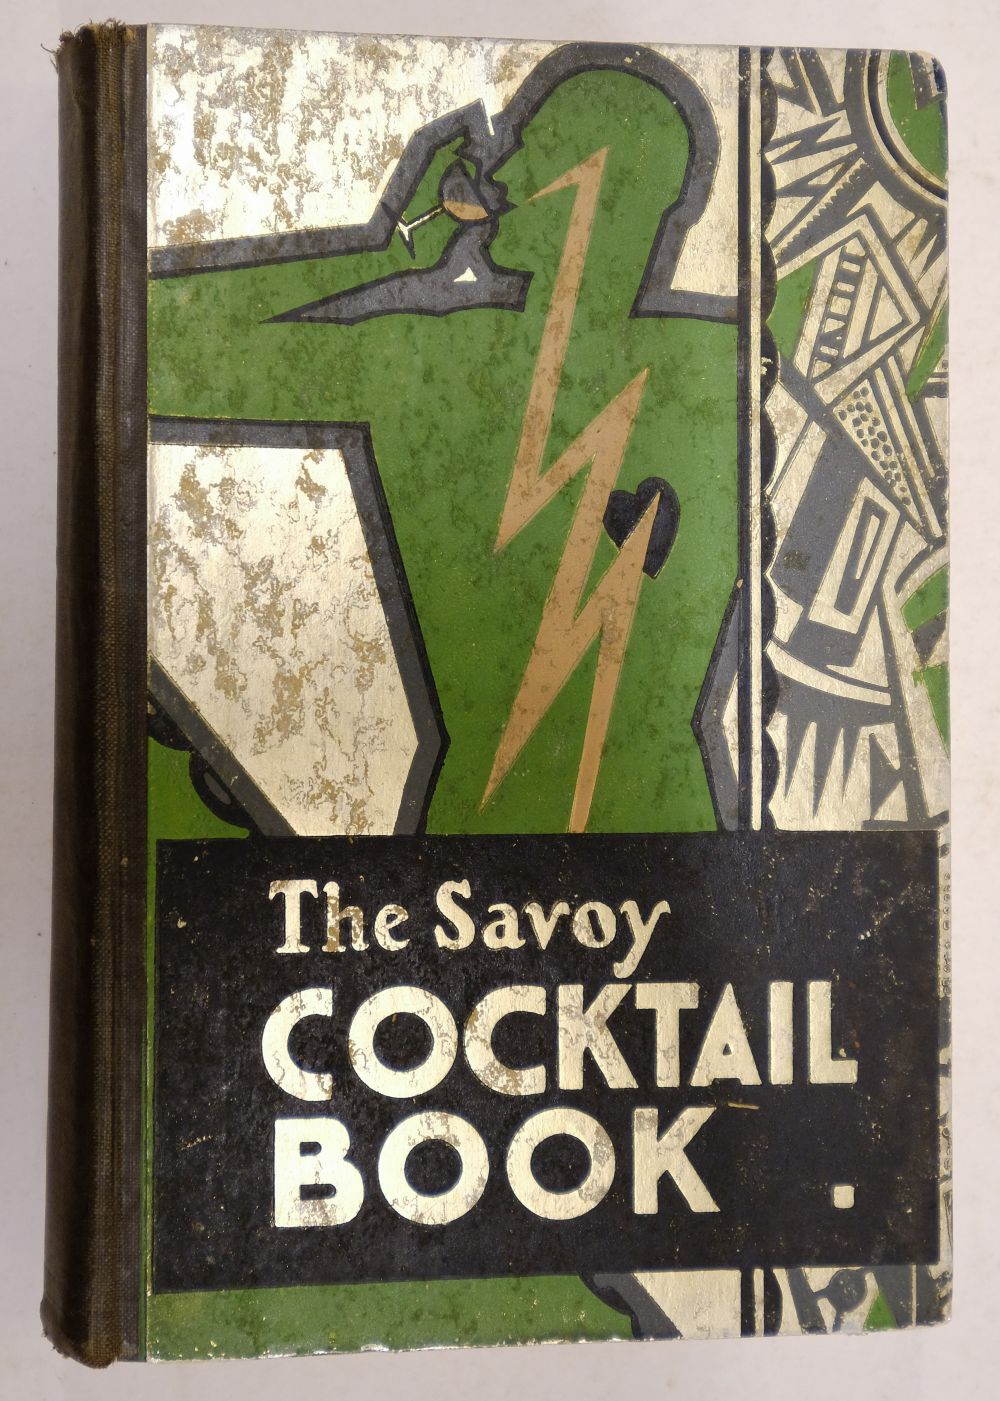 Craddock (Harry). The Savoy Cocktail Book, 1st edition, Constable & Co., 1930 - Image 2 of 7